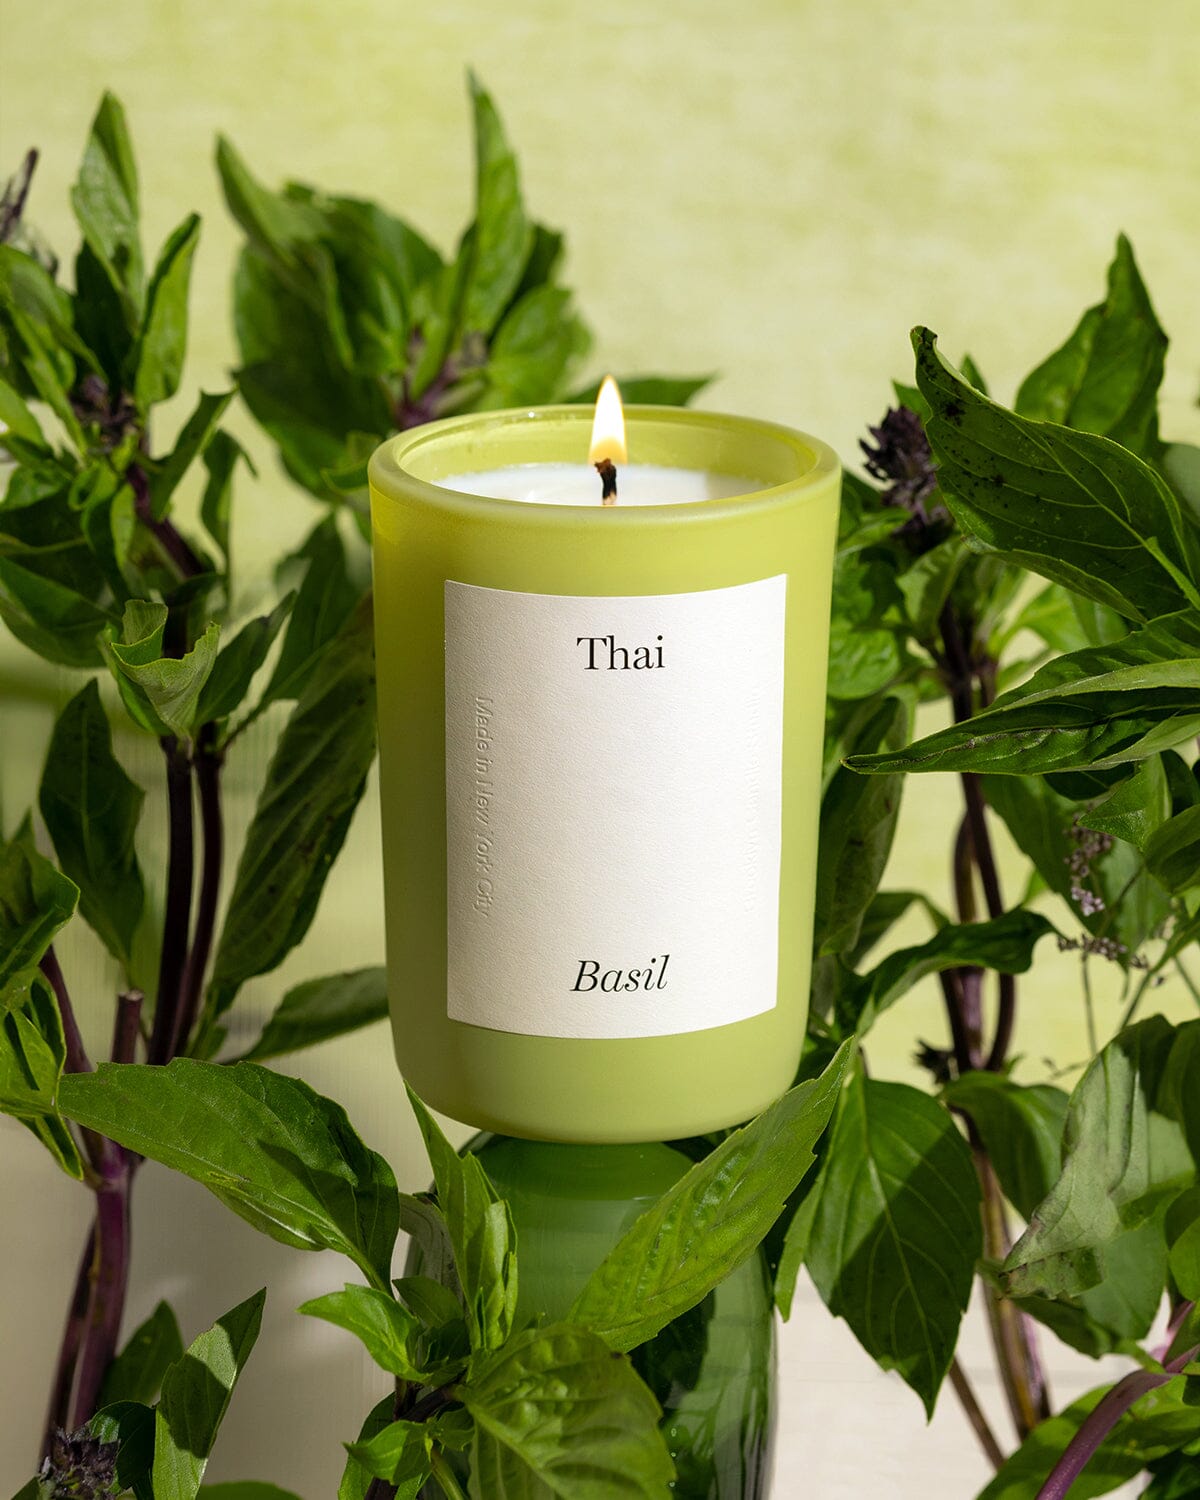 Limited Edition Thai Basil Candle Limited Edition Brooklyn Candle Studio 